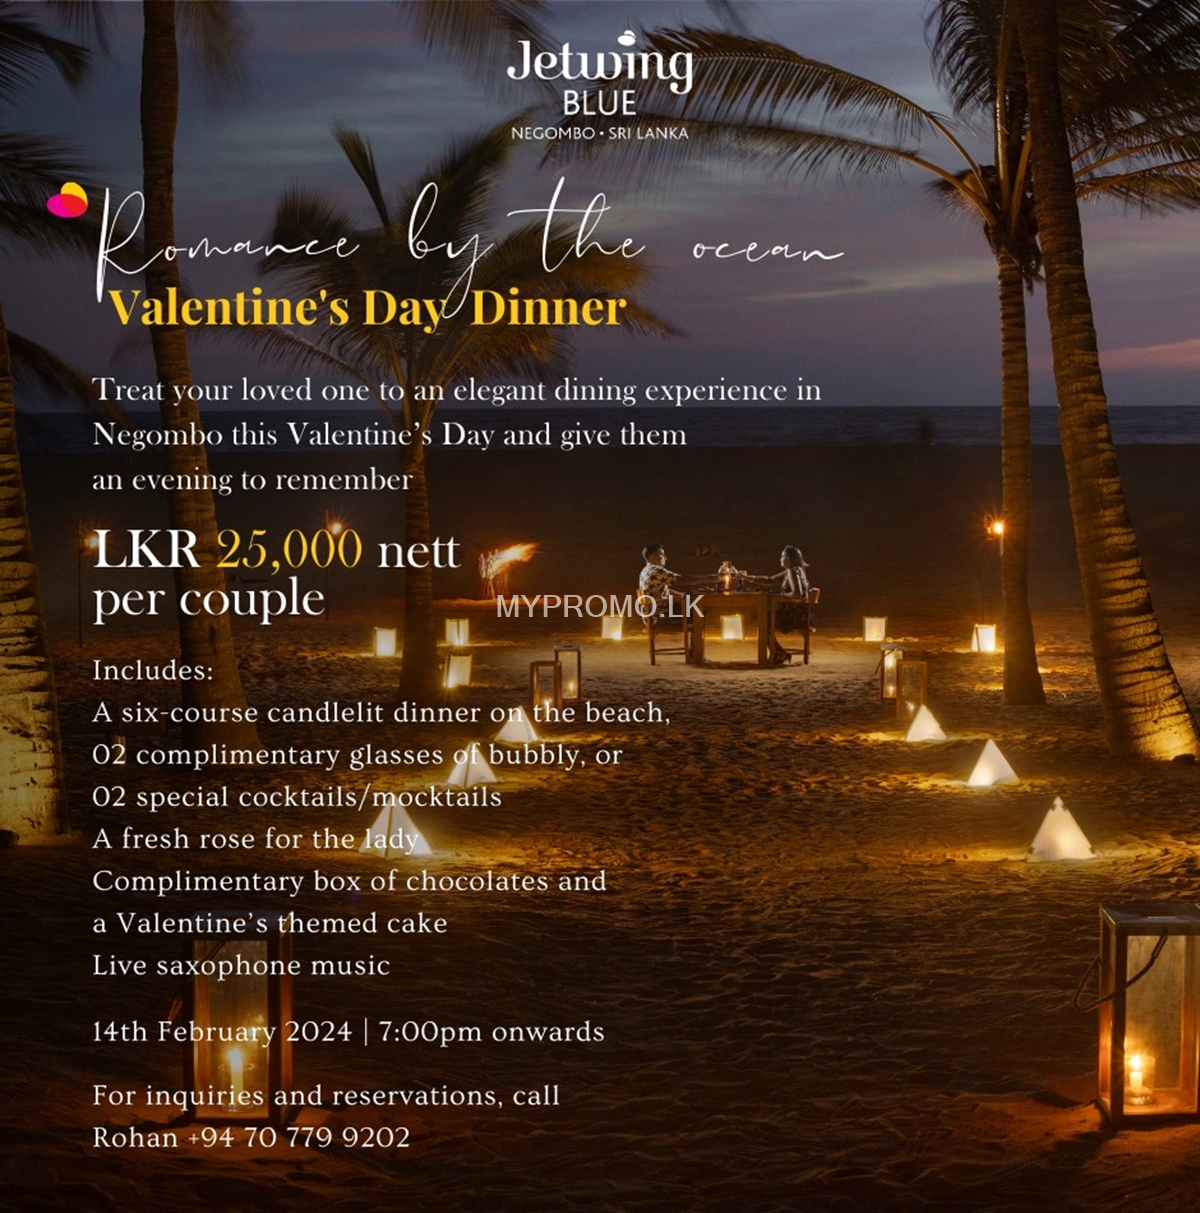 Valentine's Day Dinner at Jetwing Blue